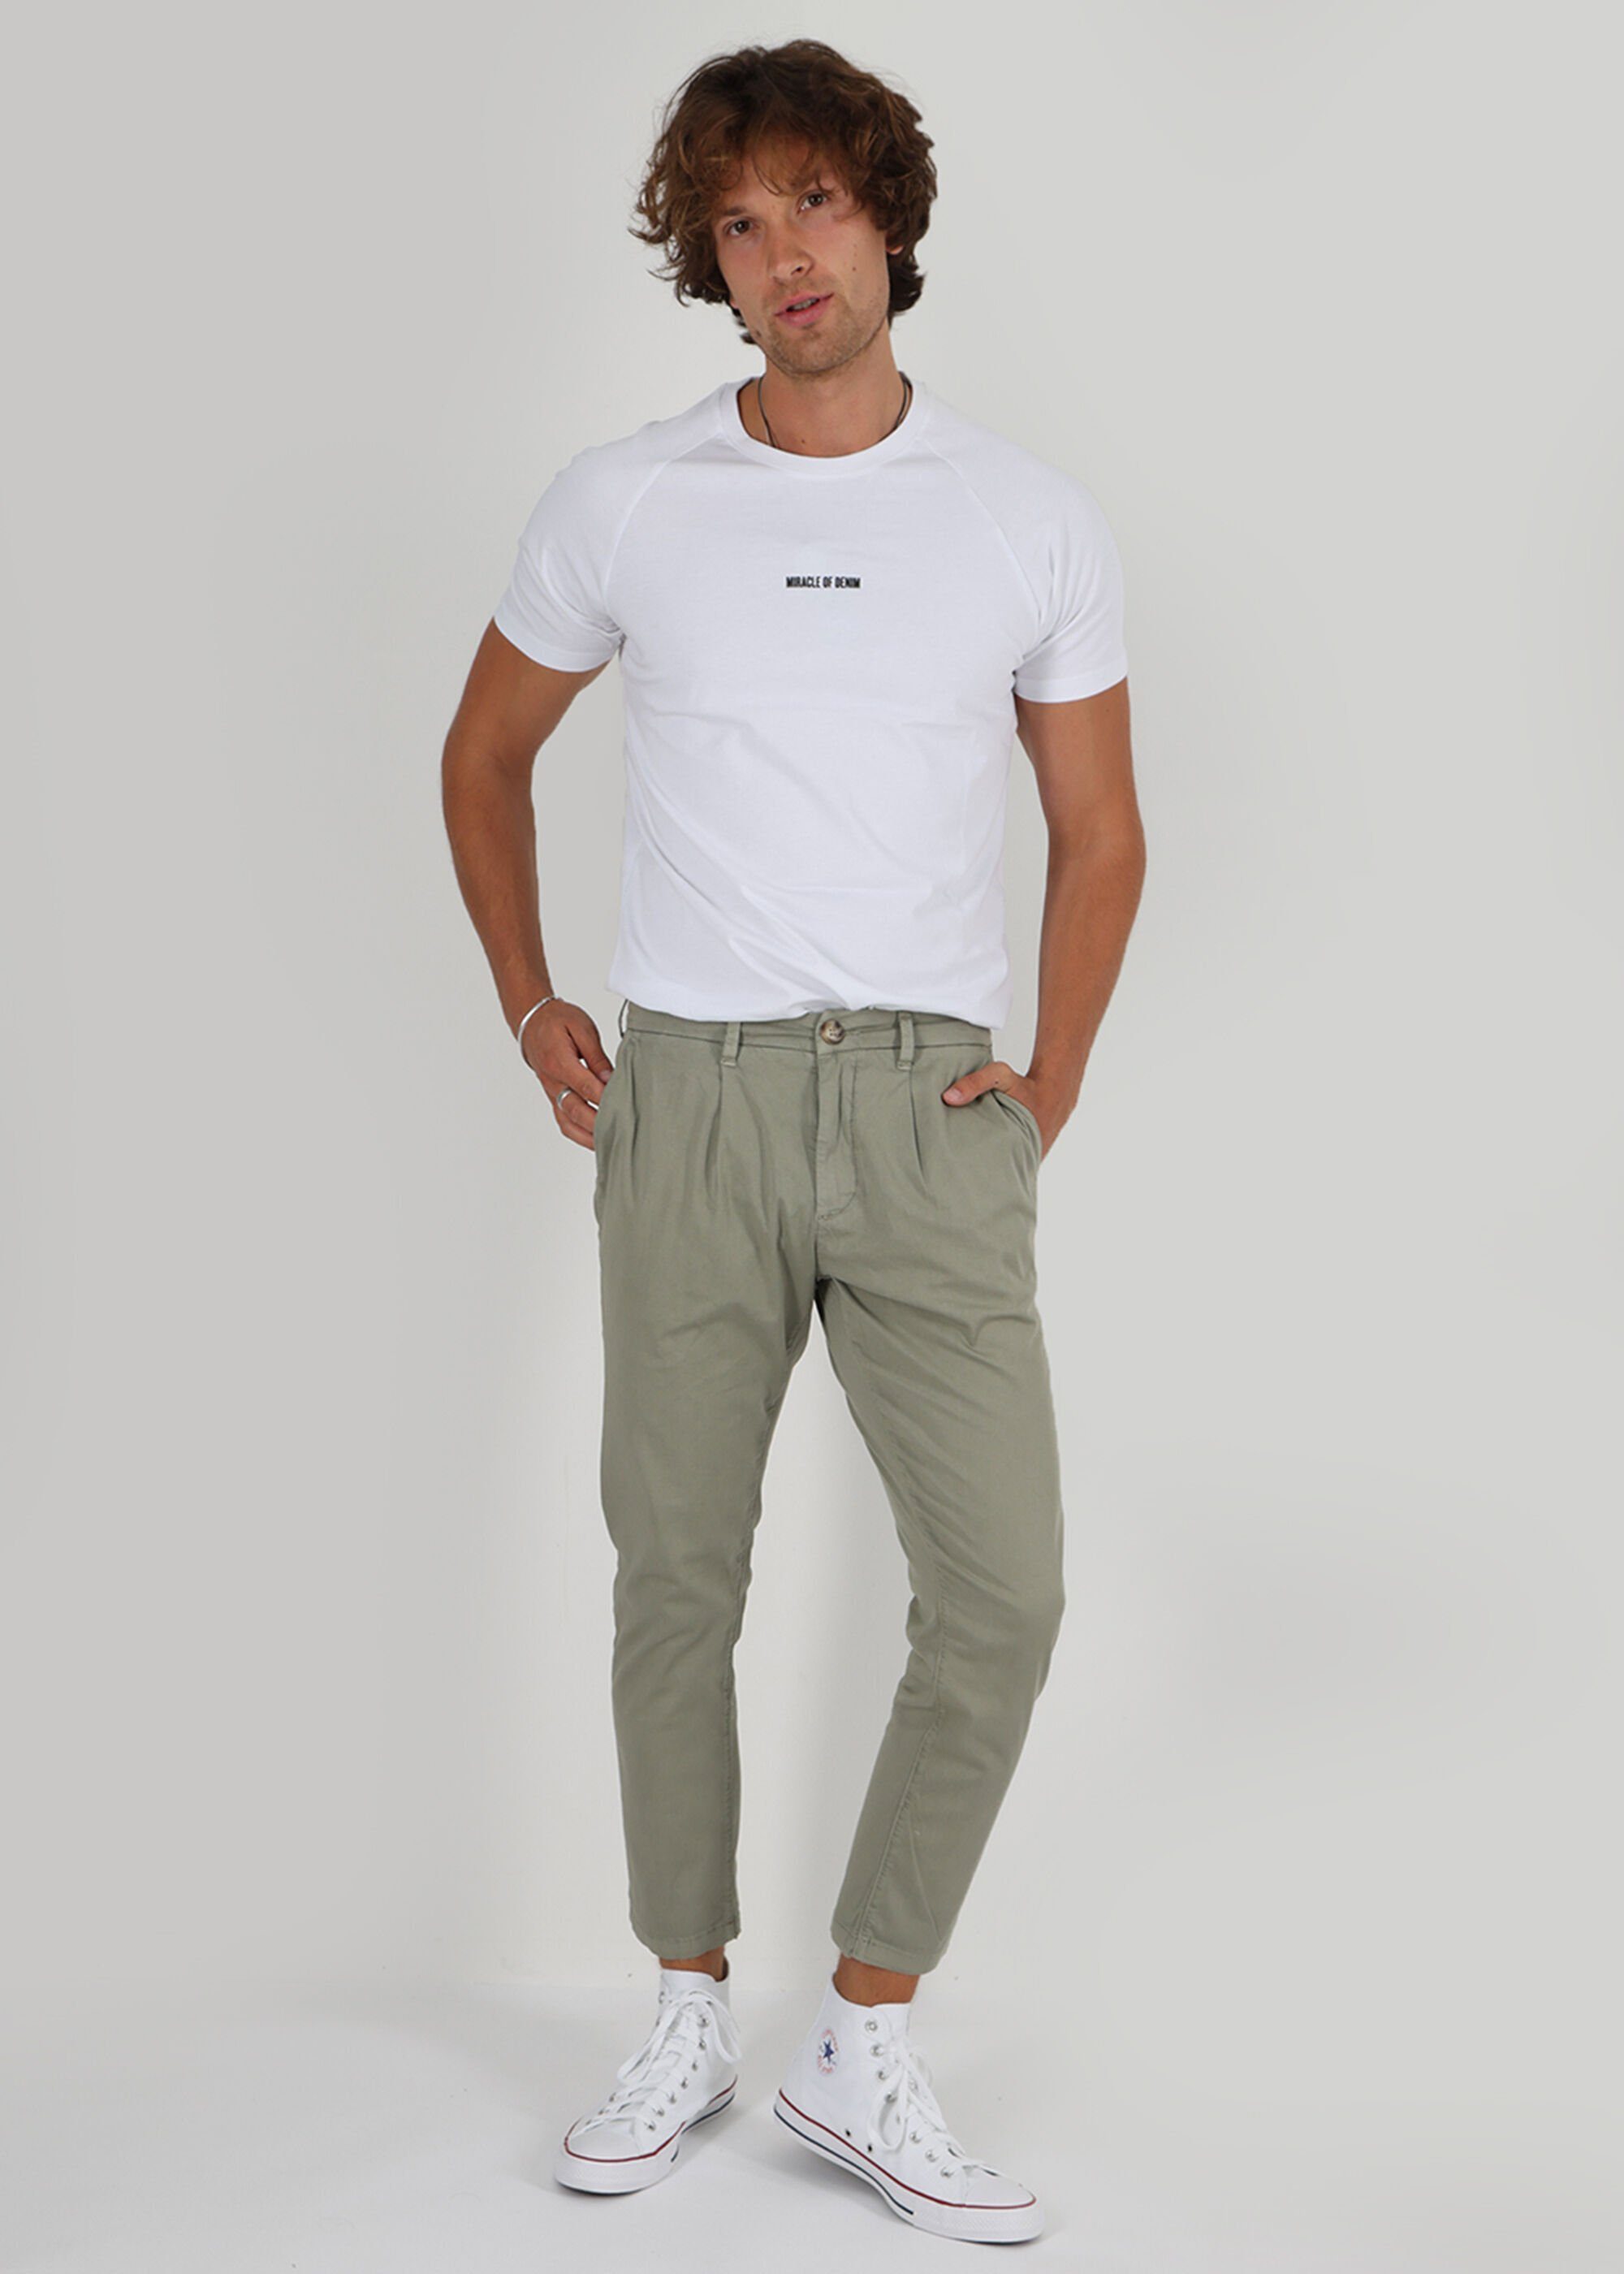 Denim of Miracle Bequem Chinohose Chino Harry Olive